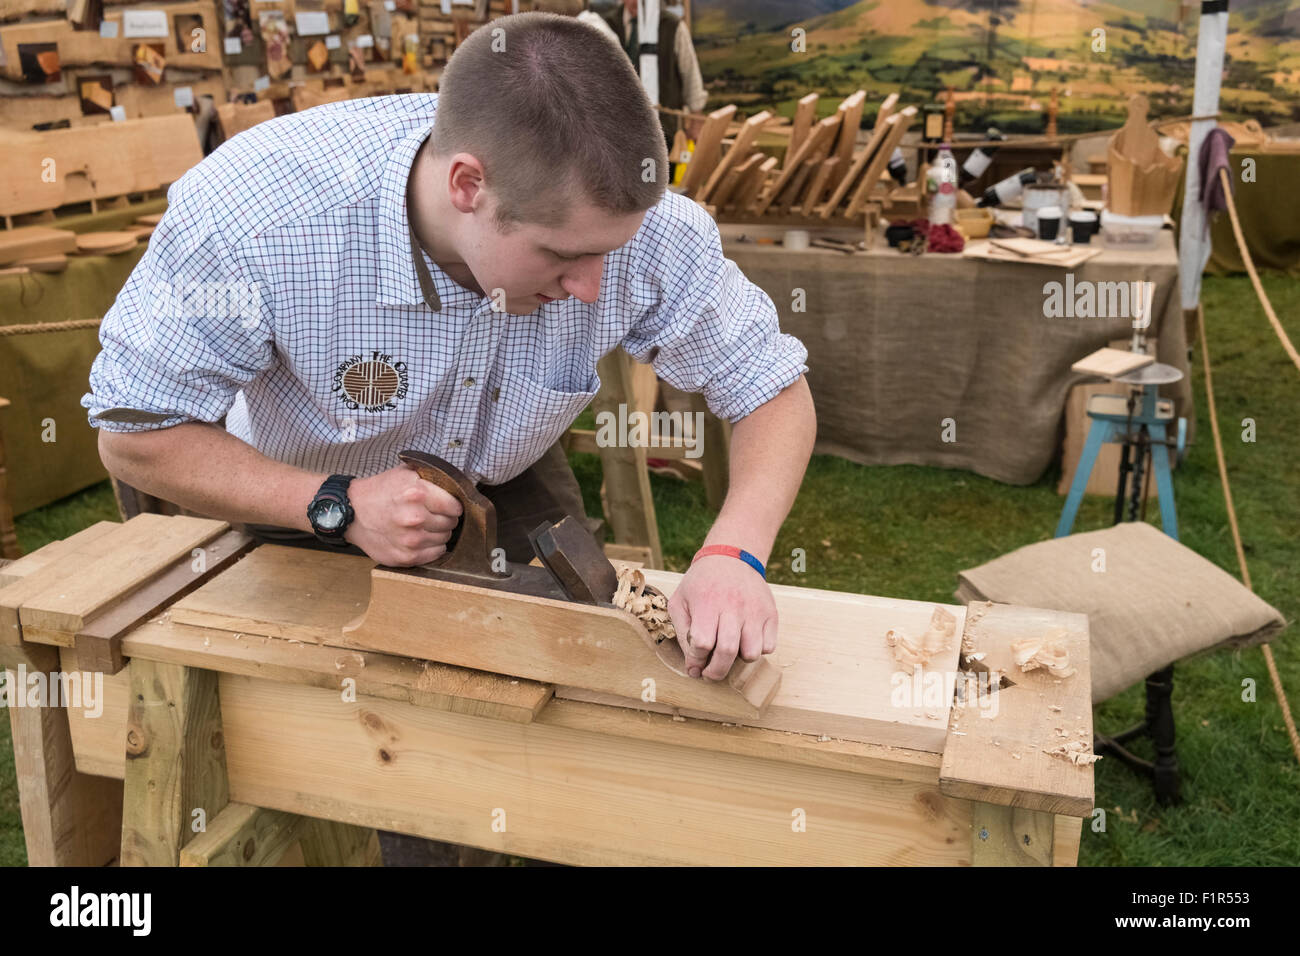 Woodworking Craftsman Using Traditional Tools And Techniques Stock Photo Alamy